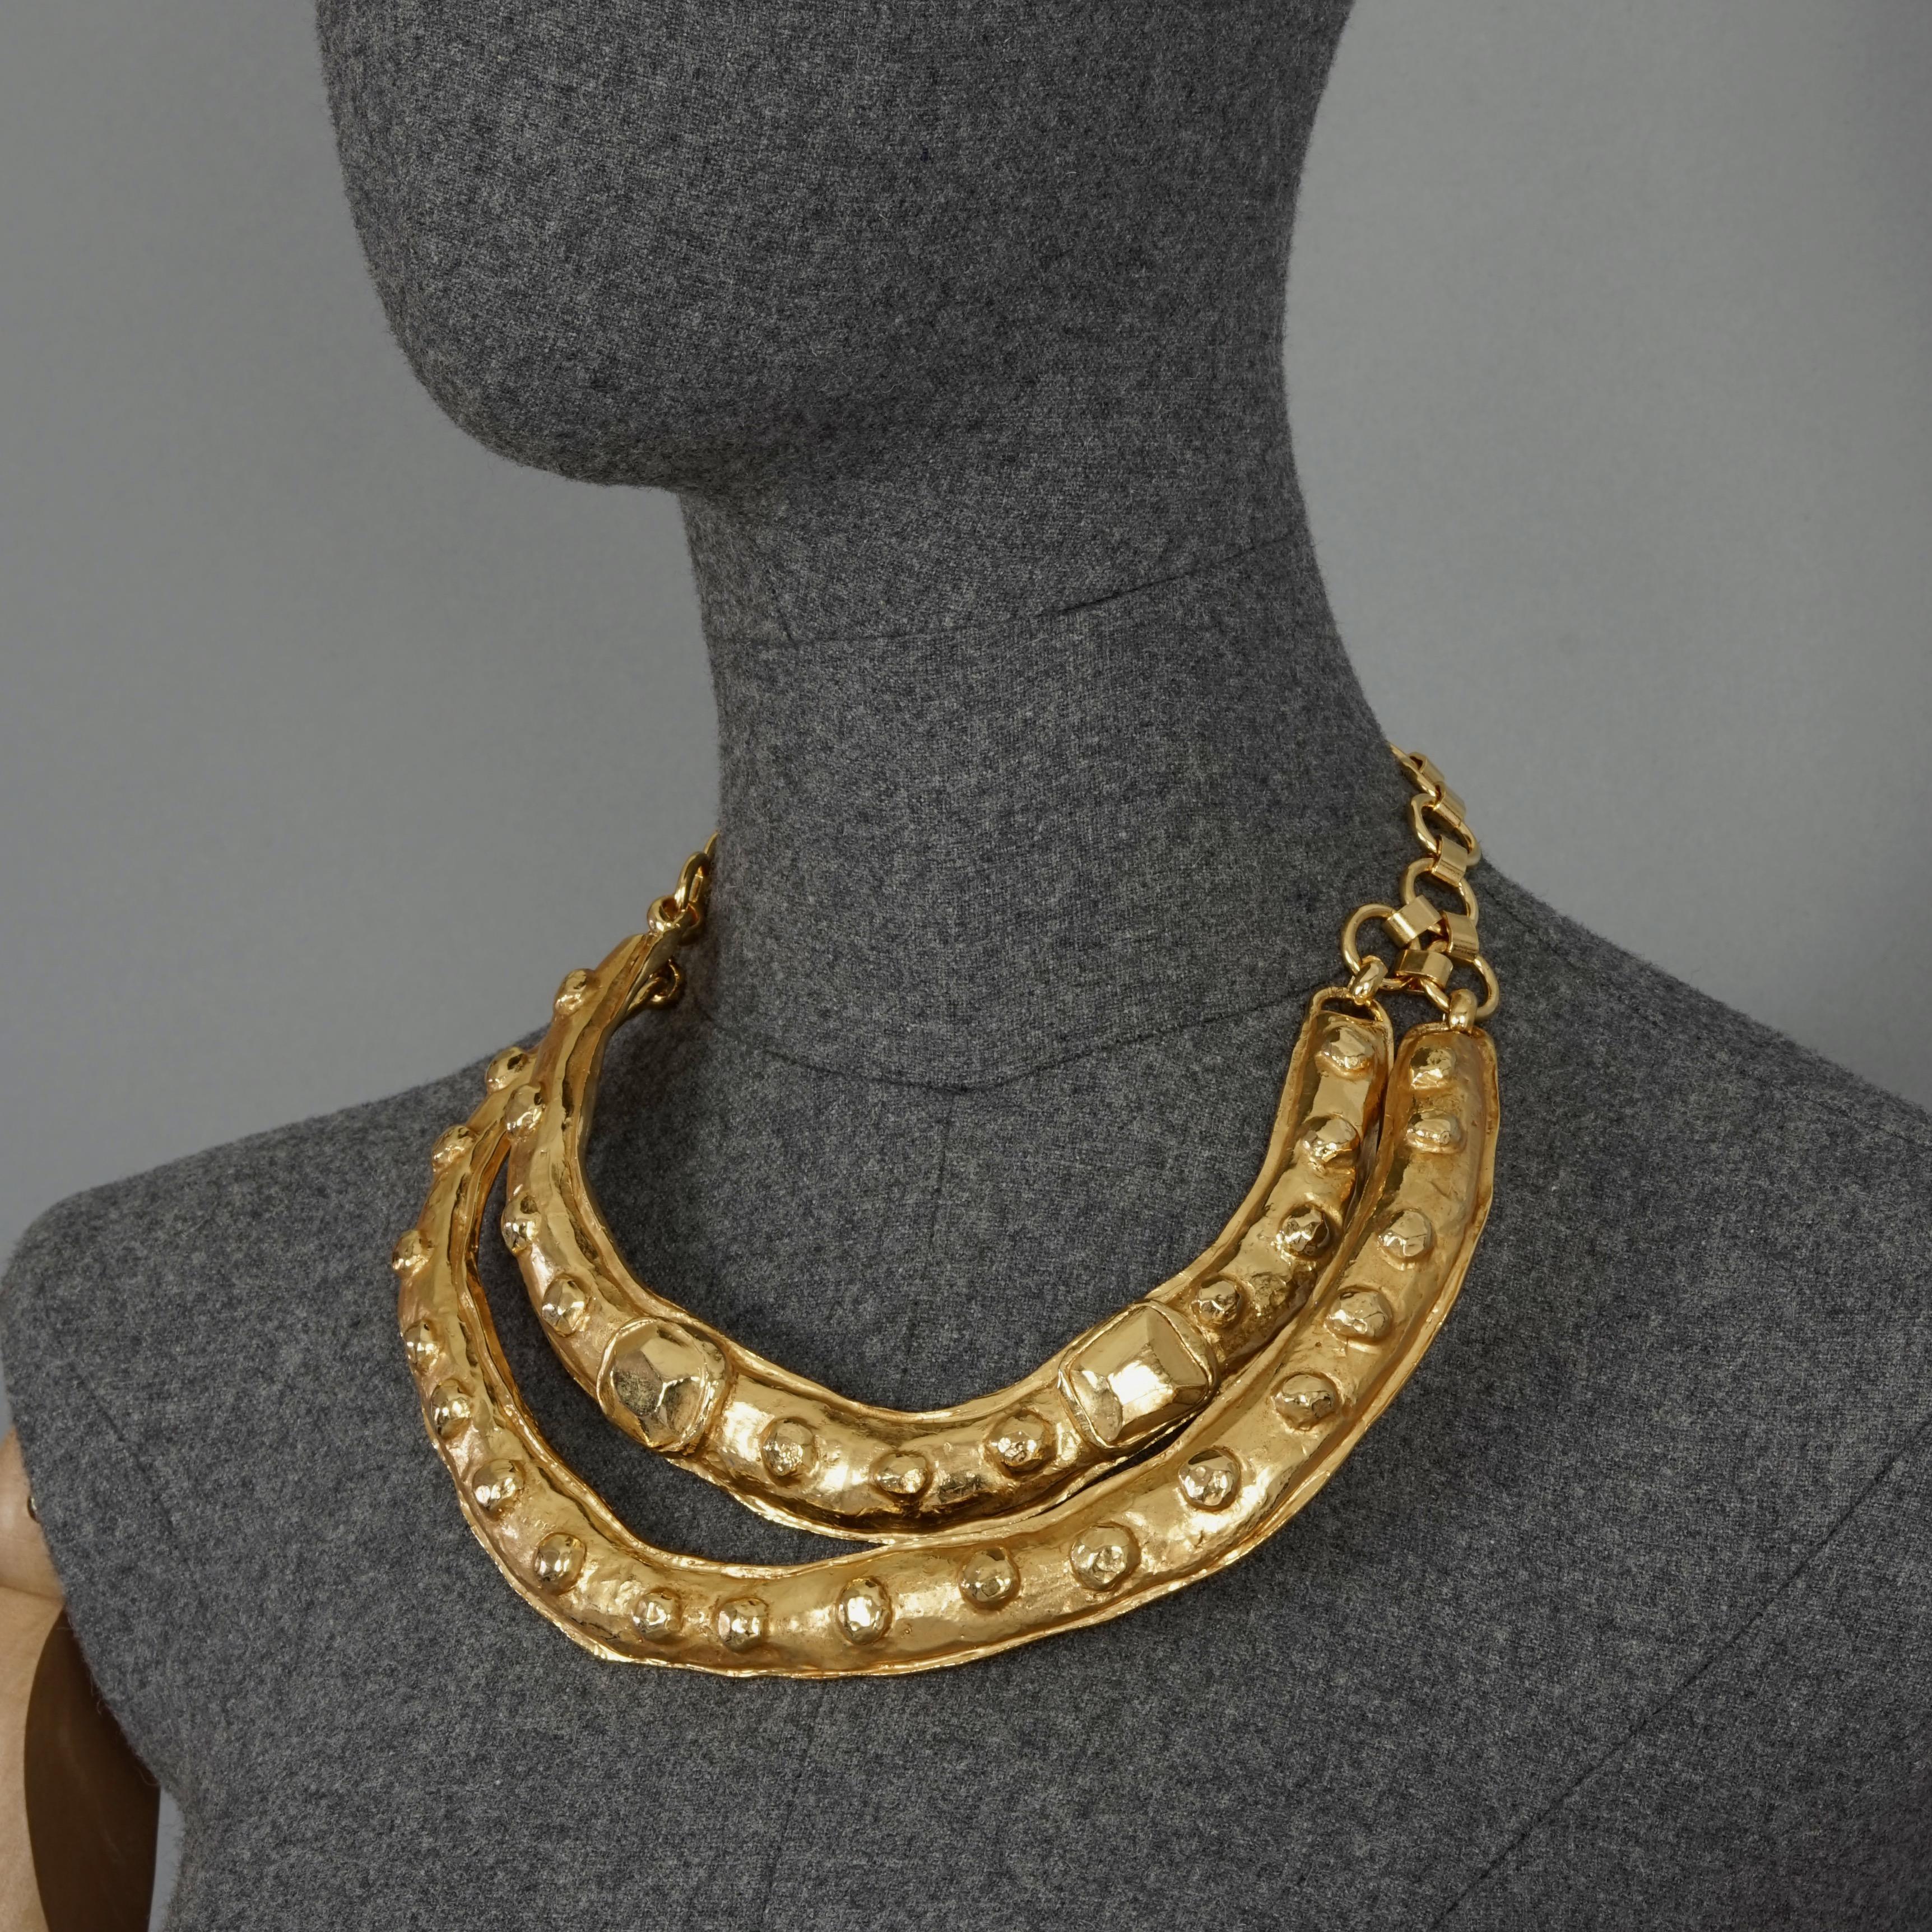 Vintage Runway CHRISTIAN LACROIX Double Layer Masai Rigid Necklace

Measurements:
Adjustable Wearable Length: 13.86 inches (35.2 cm) maximum

Features:
- 100% Authentic CHRISTIAN LACROIX.
- 2 layer textured rigid necklace.
- Each layer is textured